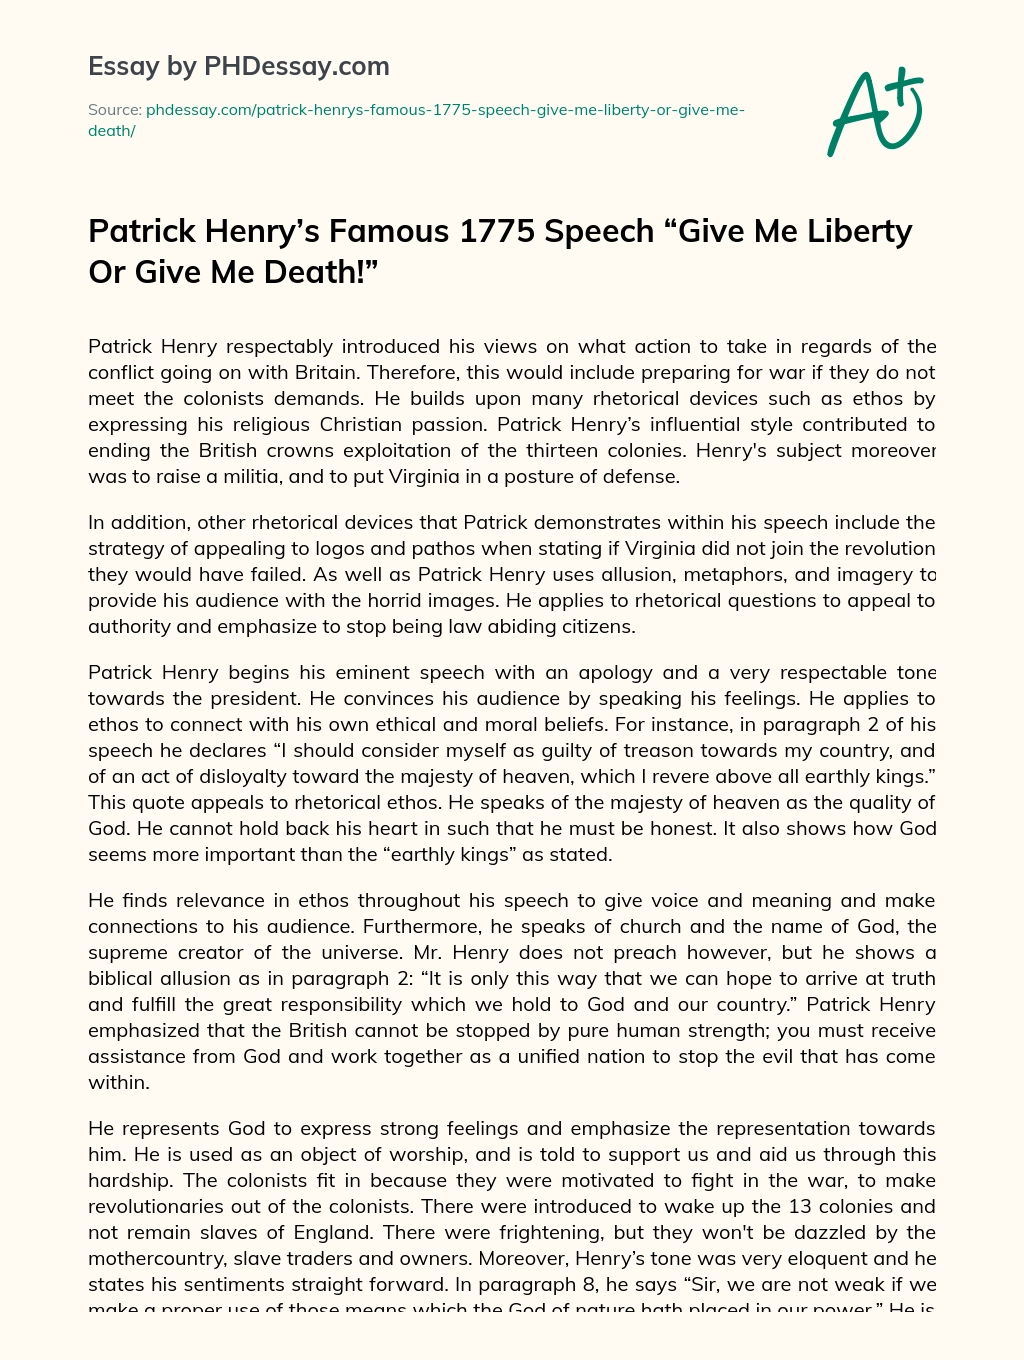 Patrick Henry’s Famous 1775 Speech “Give Me Liberty Or Give Me Death!” essay